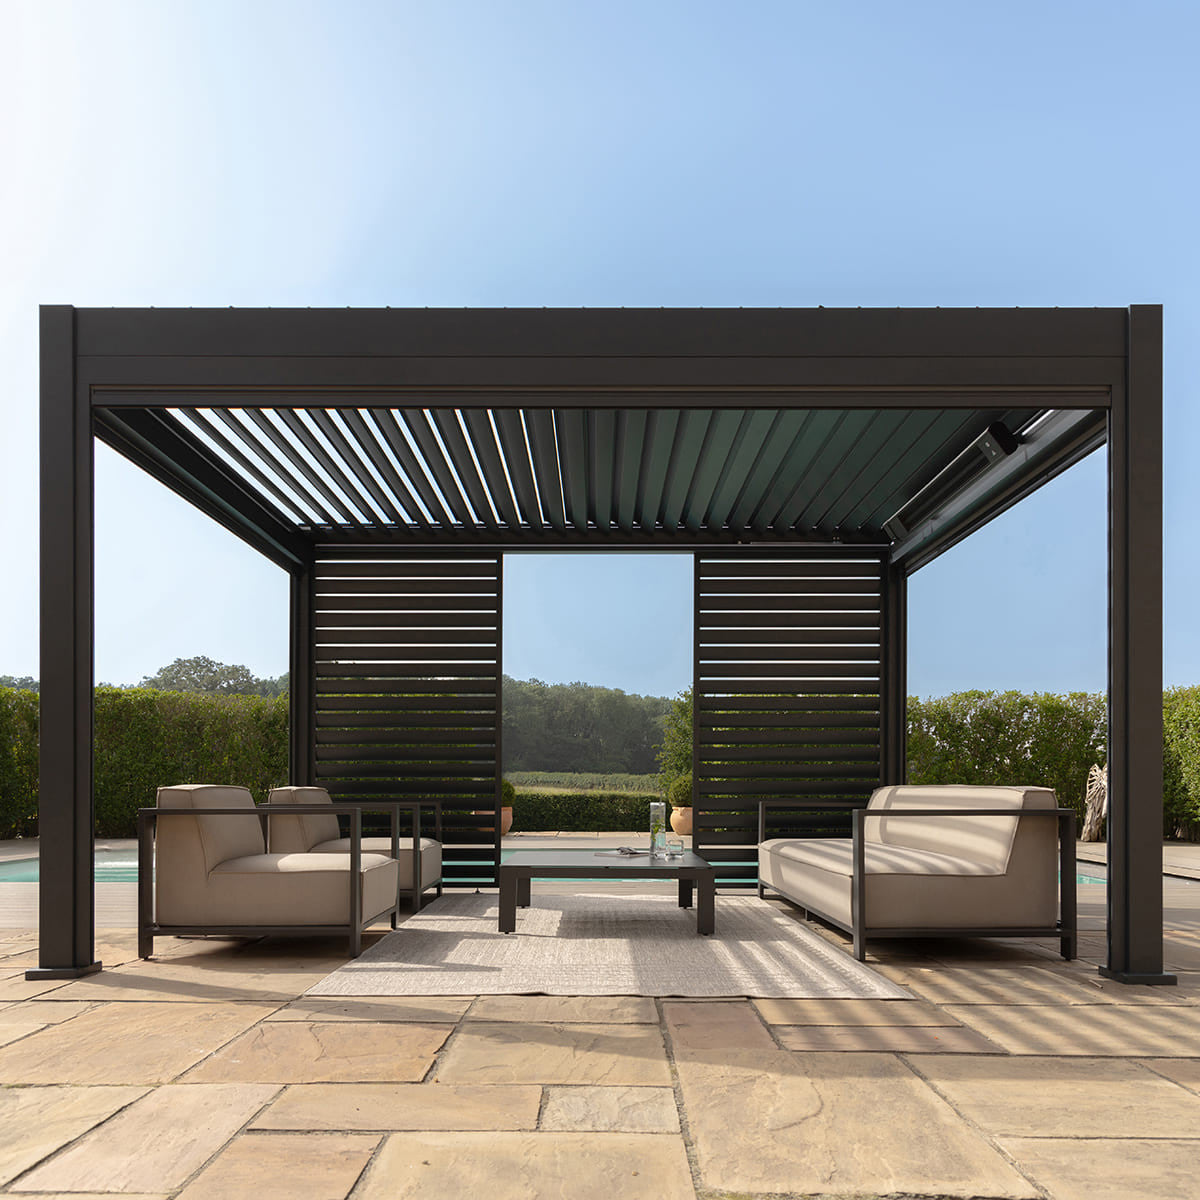 Maze Eden Pergola Aluminium Square 40x40 / Louvre Wall 4m / 3x Blinds From Front-Better Bed Company